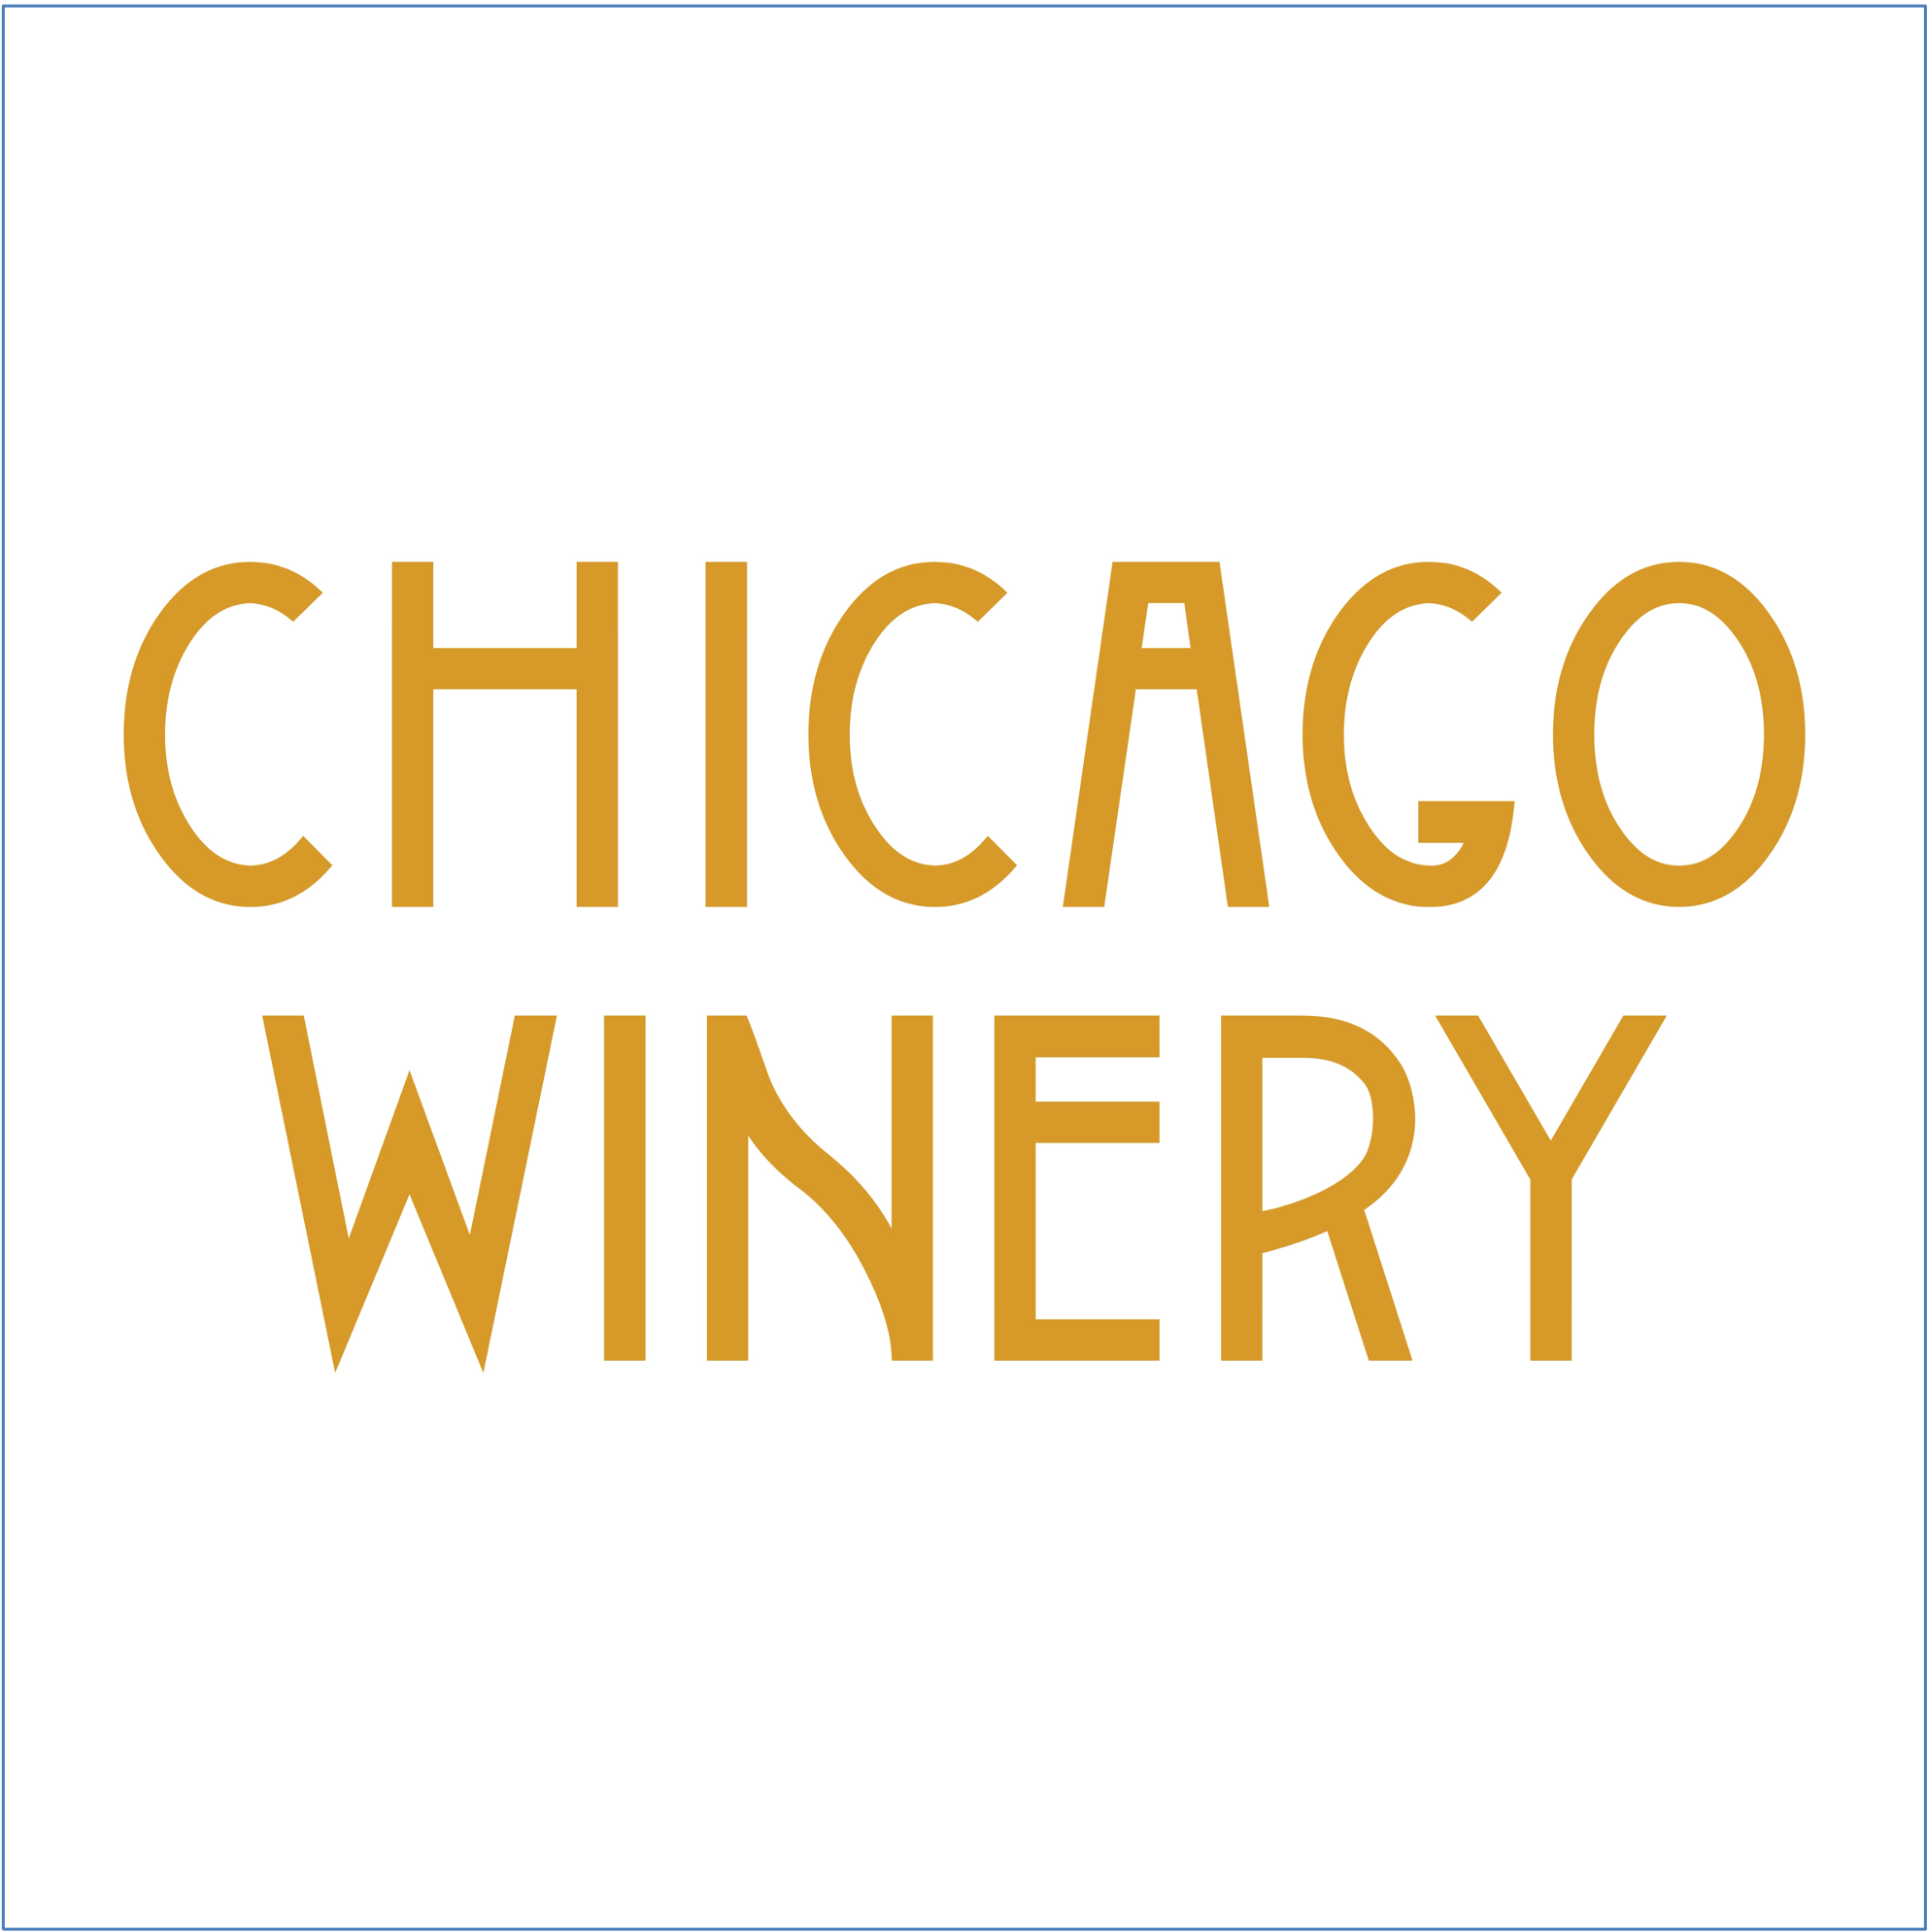 Chicago Winery